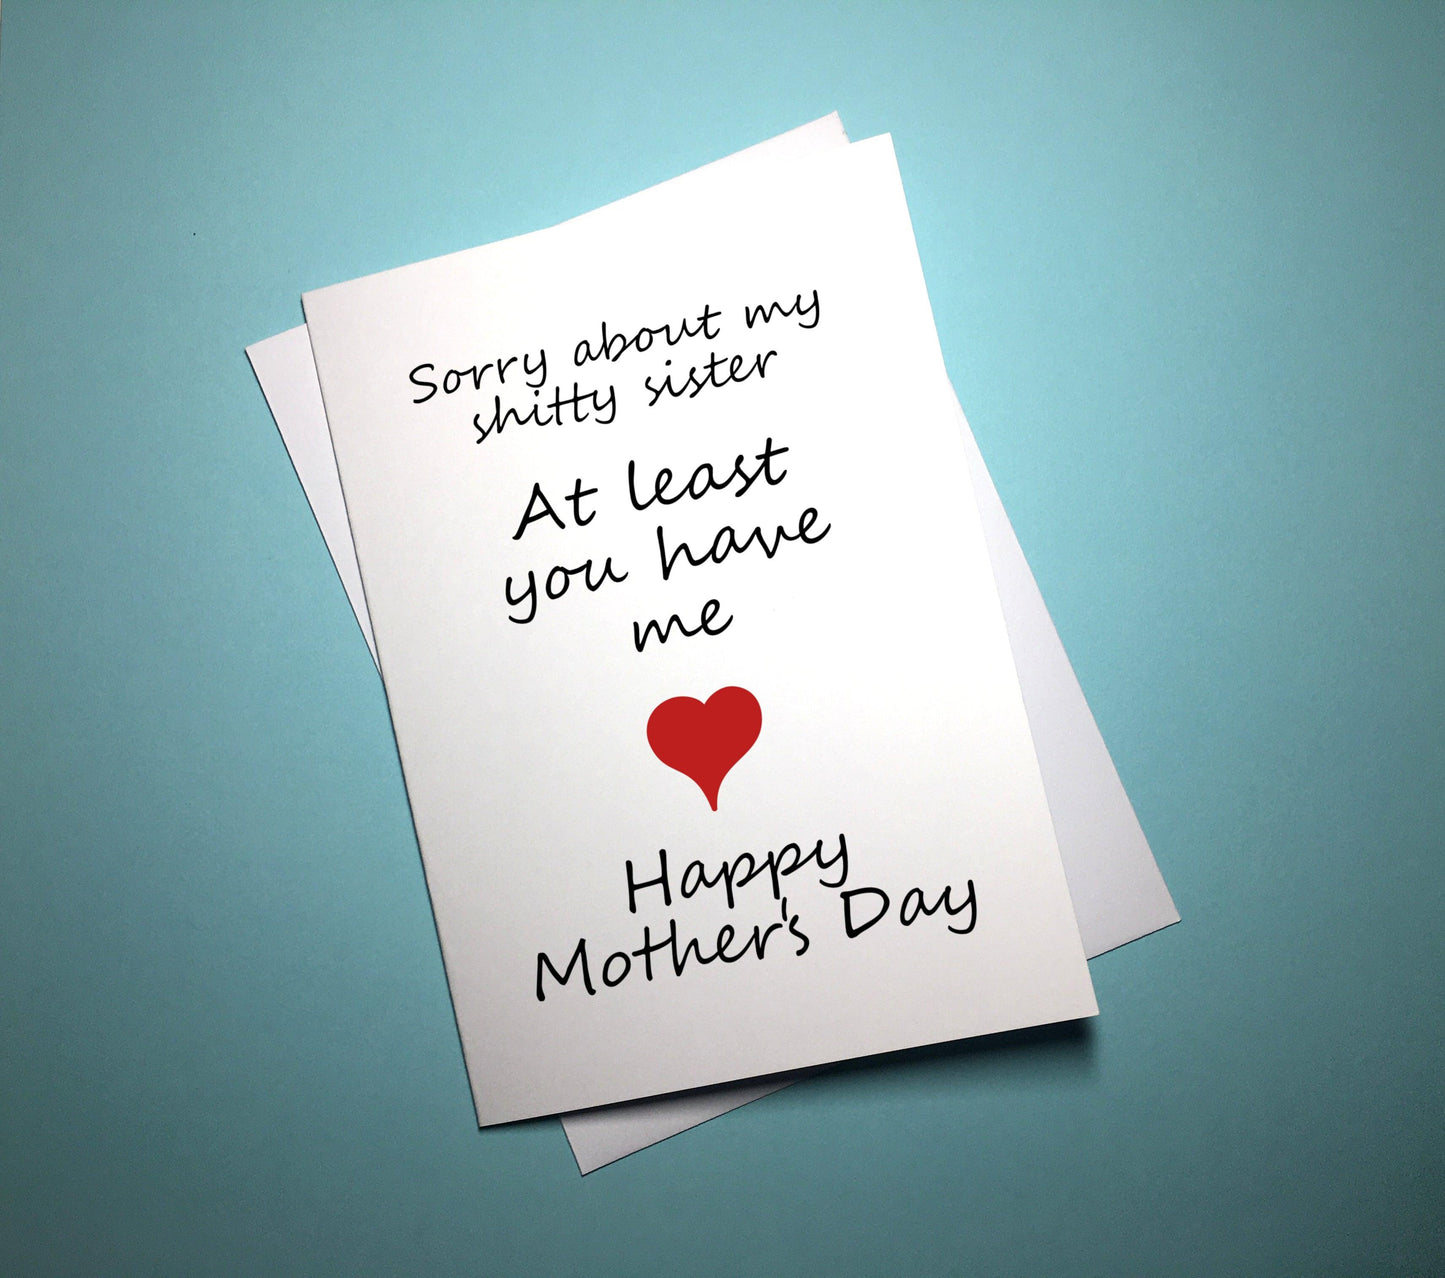 Mother's Day Card - Shitty Sister - Mr. Inappropriate 